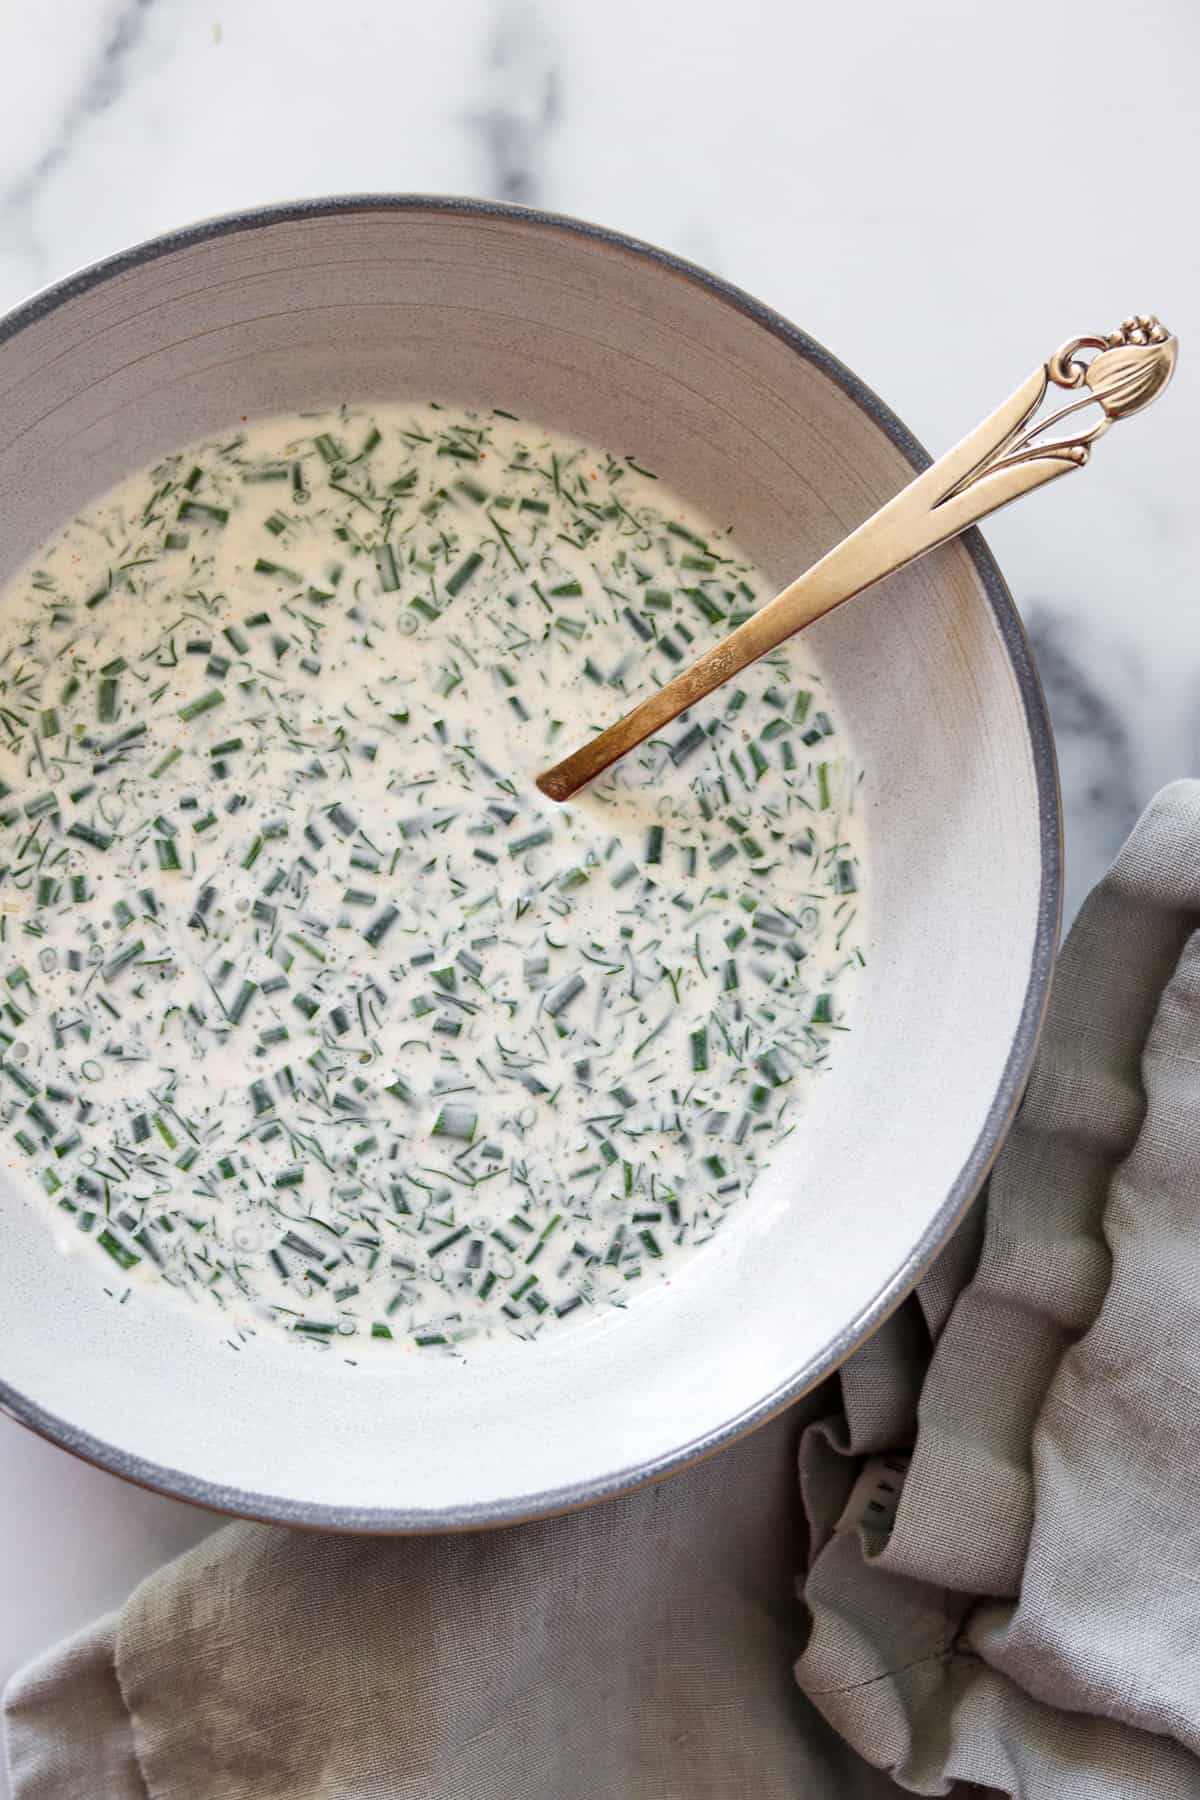 Creamy herbed skyr sauce in a bowl with a spoon.